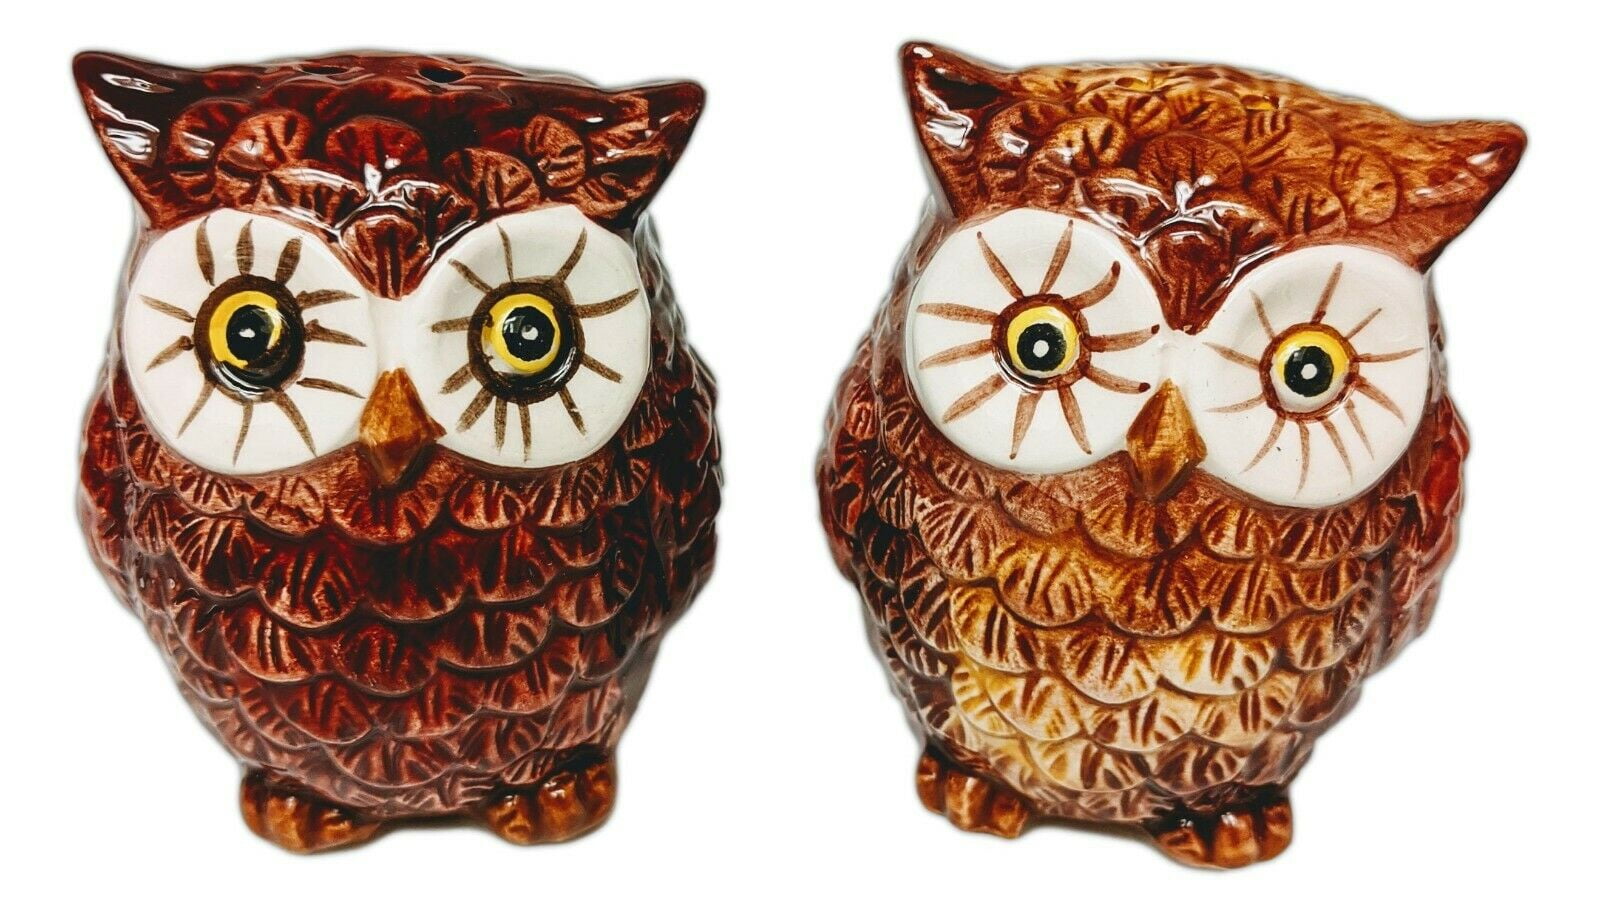 Artsy Owl Collection Hand-Painted Ceramic by Boston Warehouse Salt & Pepper Shakers